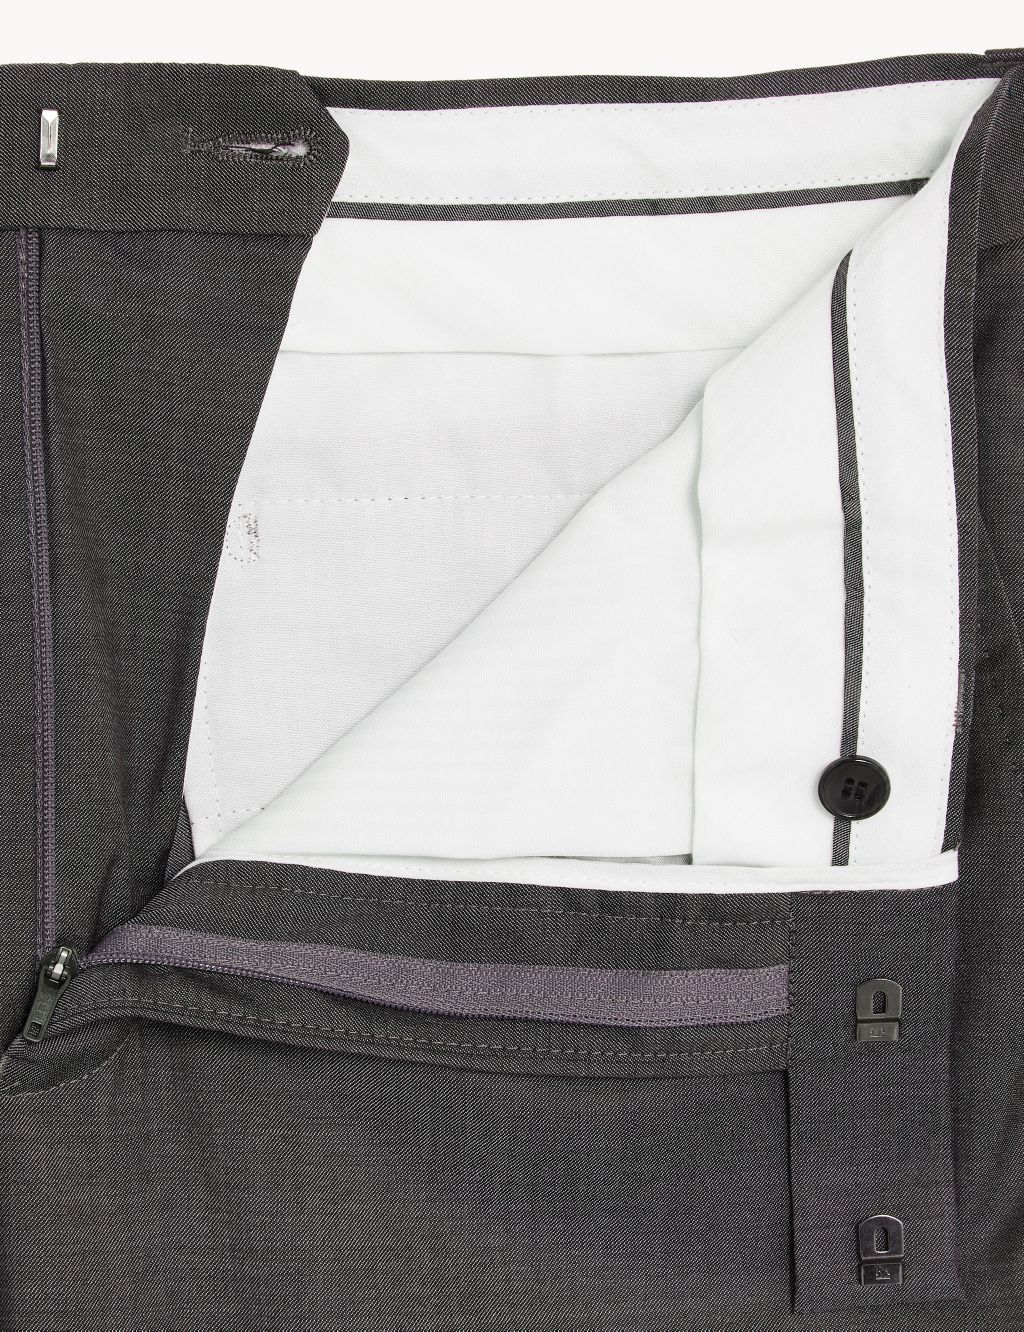 Tailored Fit Pure Wool Suit Trousers image 7